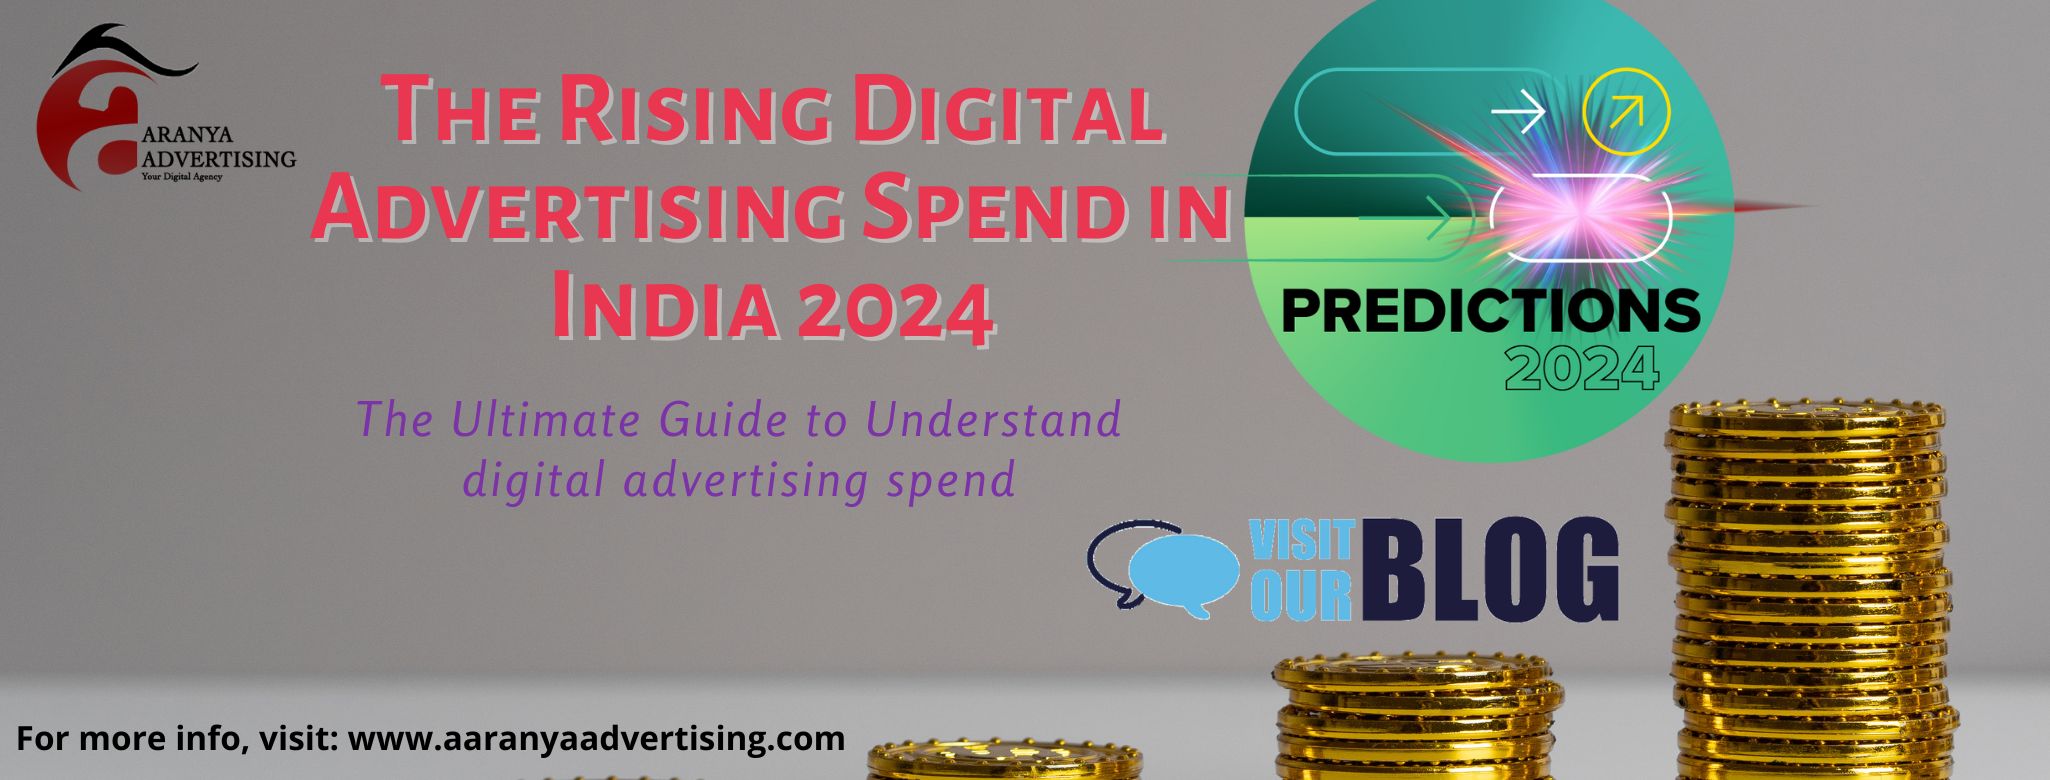 Discover India's booming Digital advertising spend market as it gears up to hit $13.7B in 2024, capturing 1.3% of the global ad spend share.